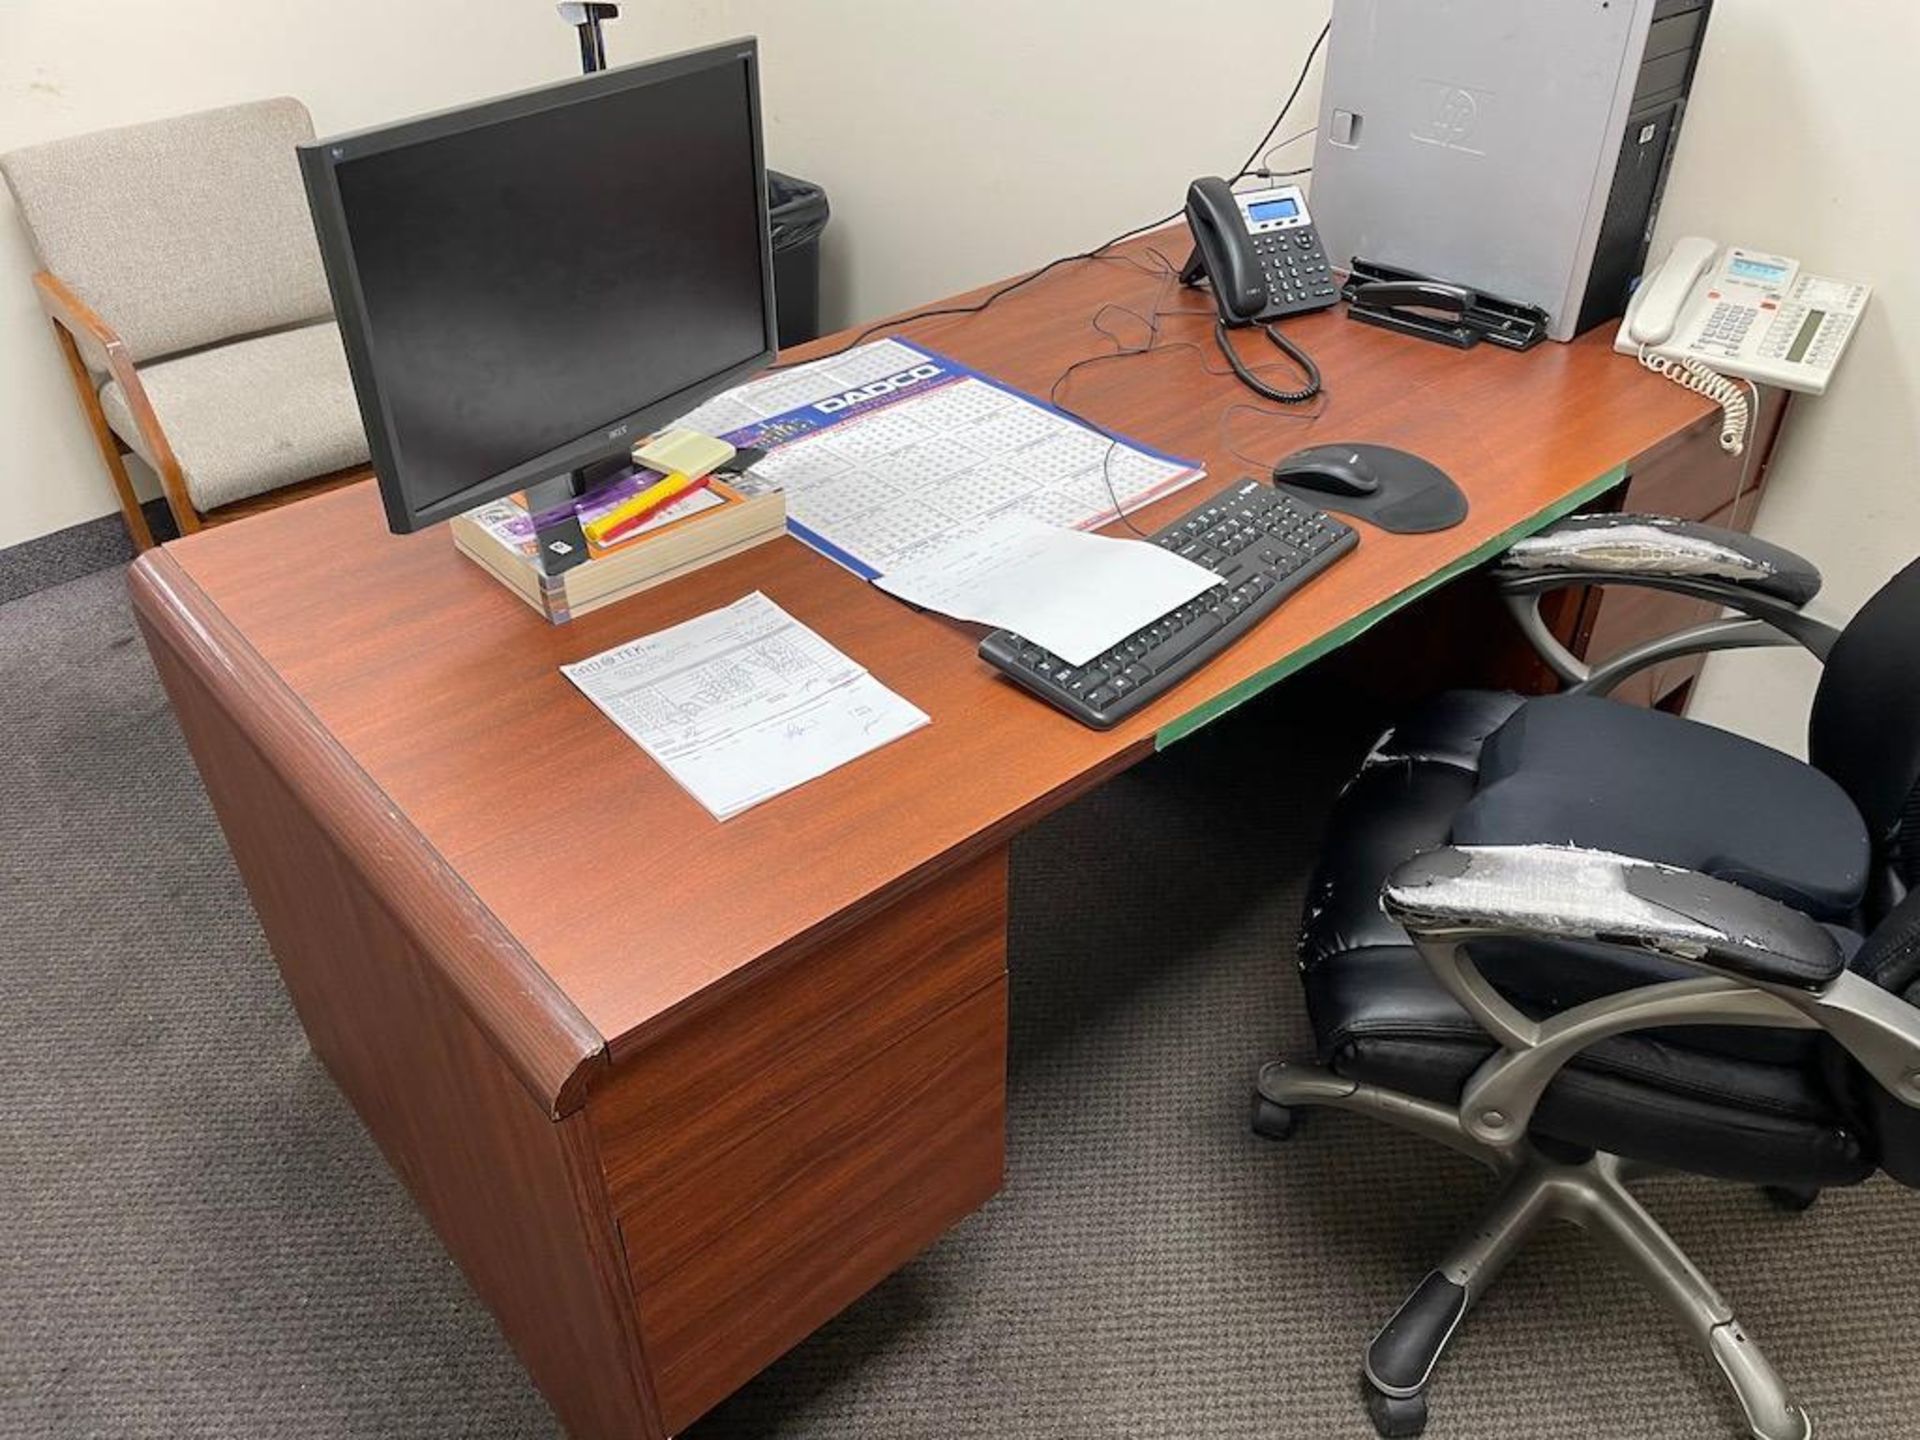 2 OFFICES INCLUDING: 7' X 3' EXEC. TABLE, REAR TABLE, FILE CABINET, 3 CHAIRS, 6'X3' TABLE, 6'X21" RE - Image 6 of 10